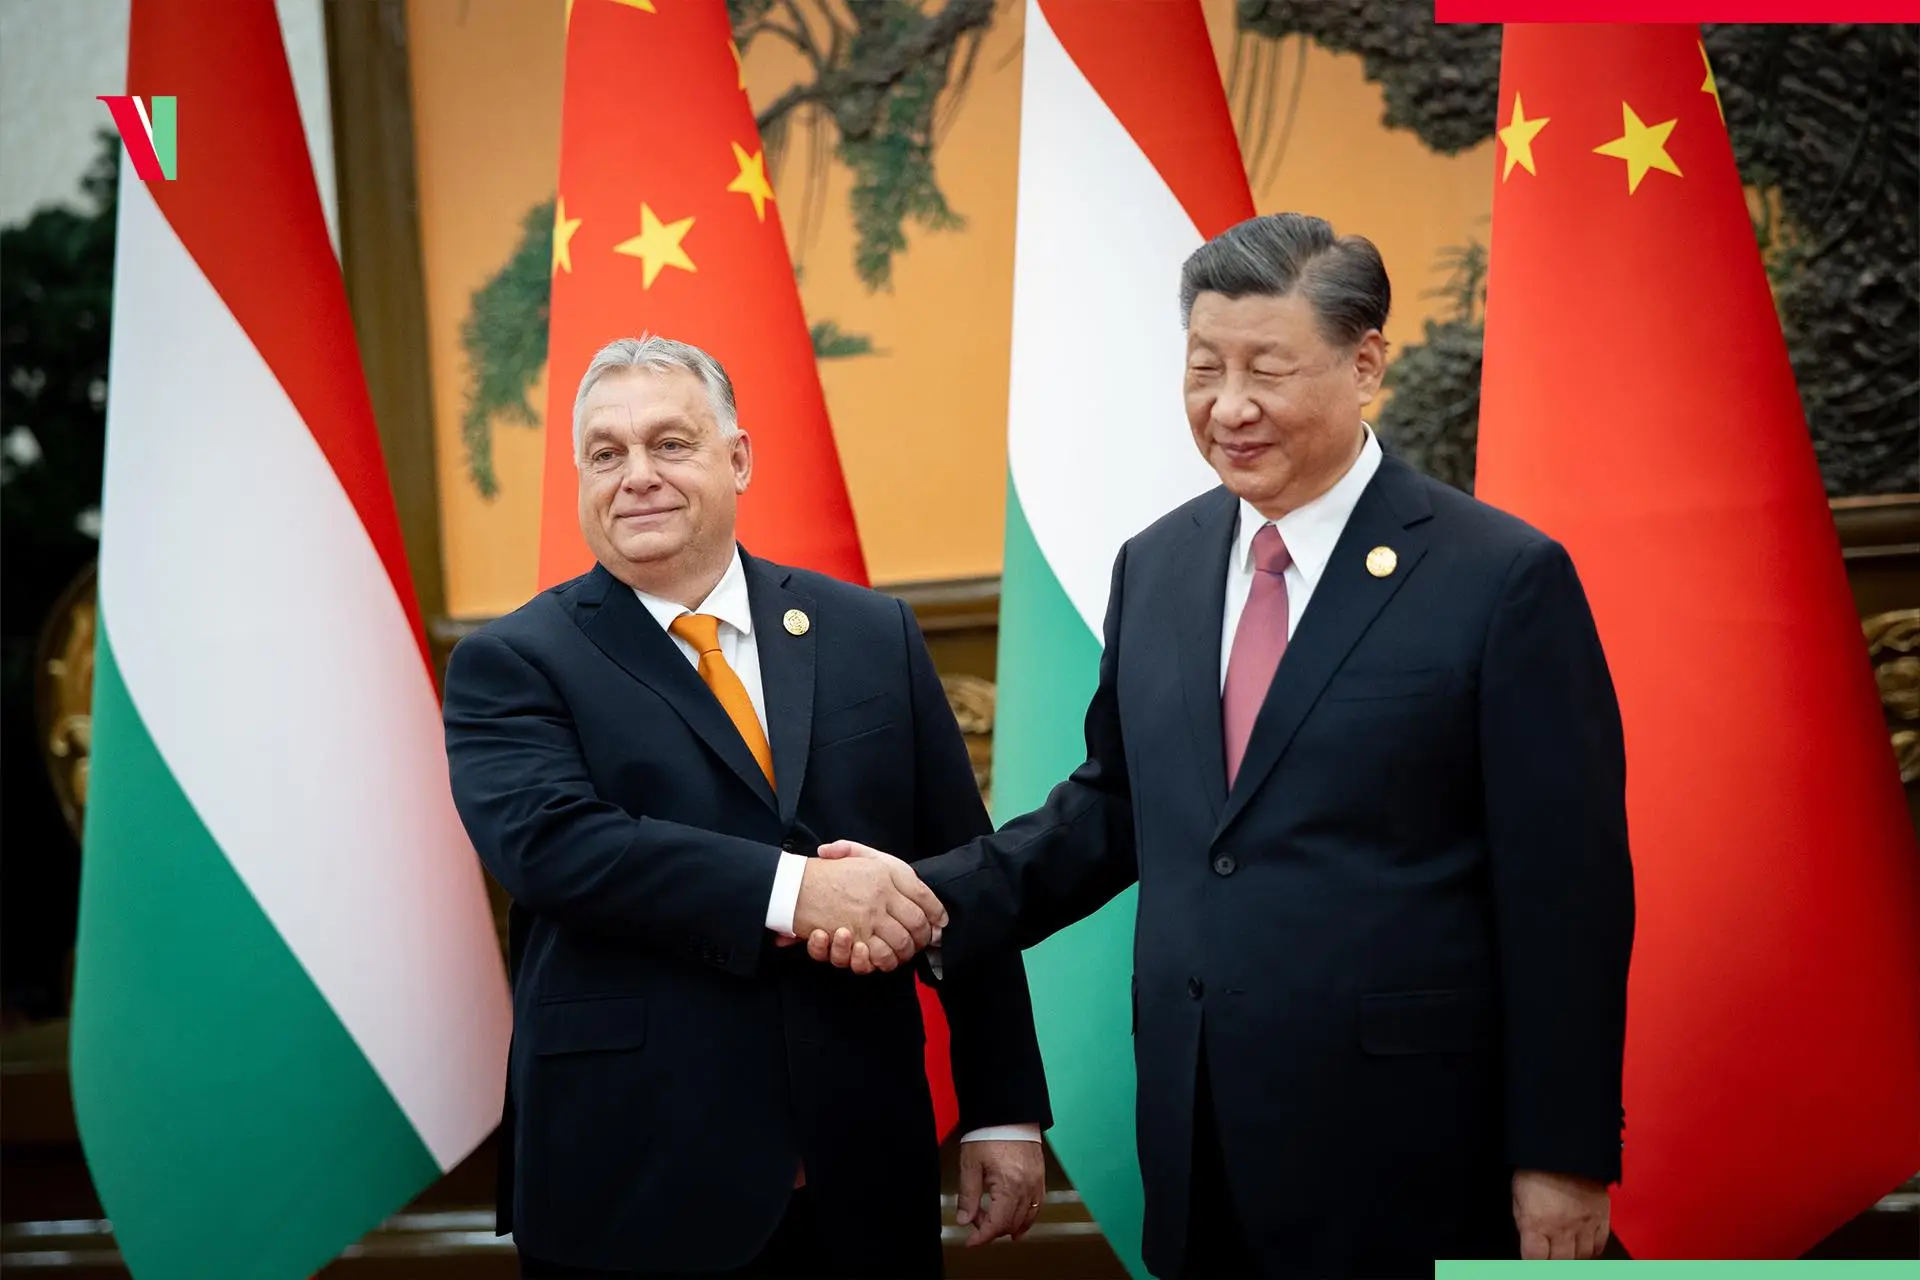 PM Orbán Xi Jinping in Beijing chinese president